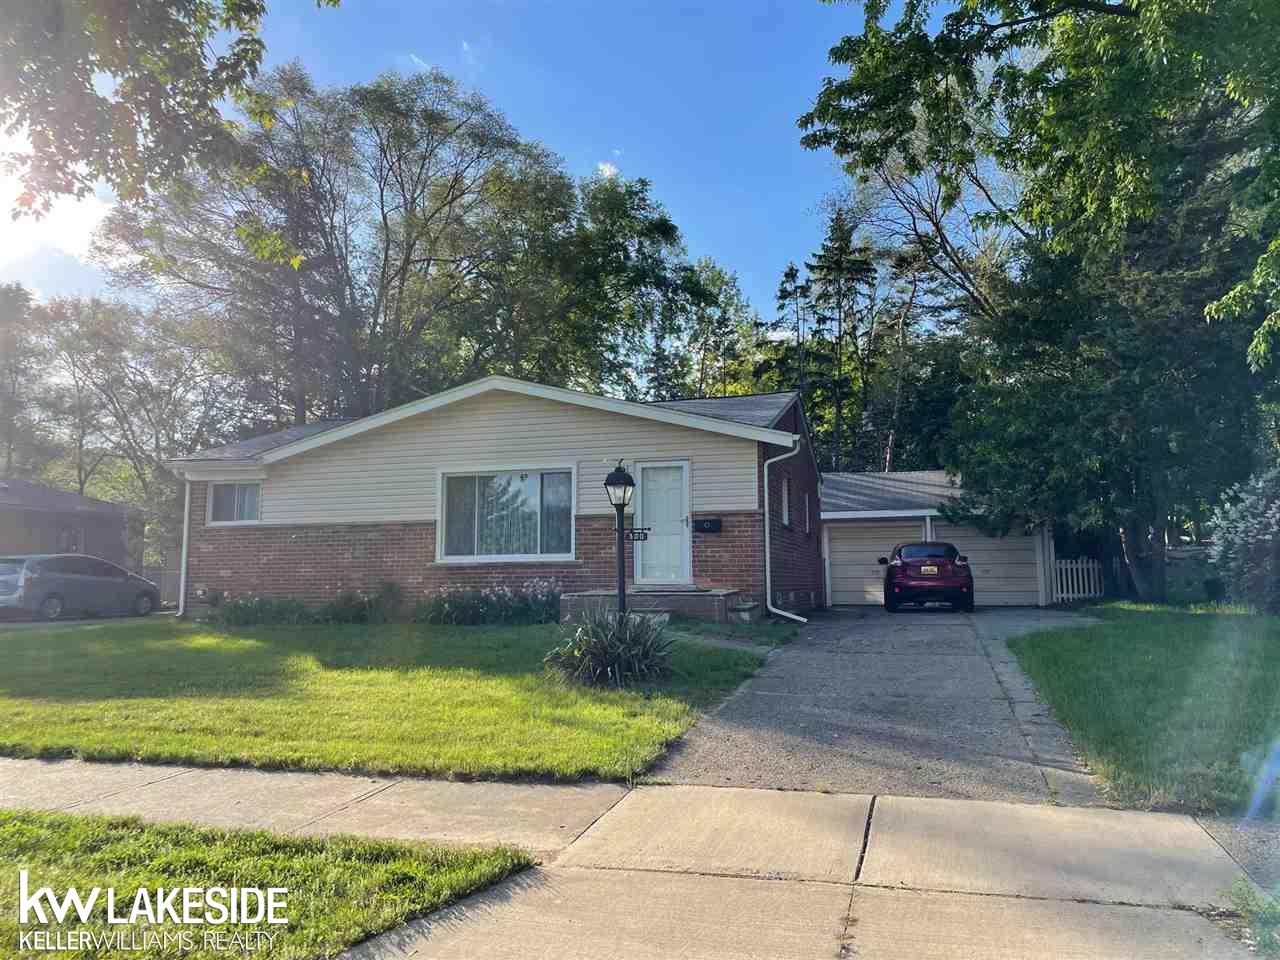 300 Winry Dr., Rochester Hills, MI 48307